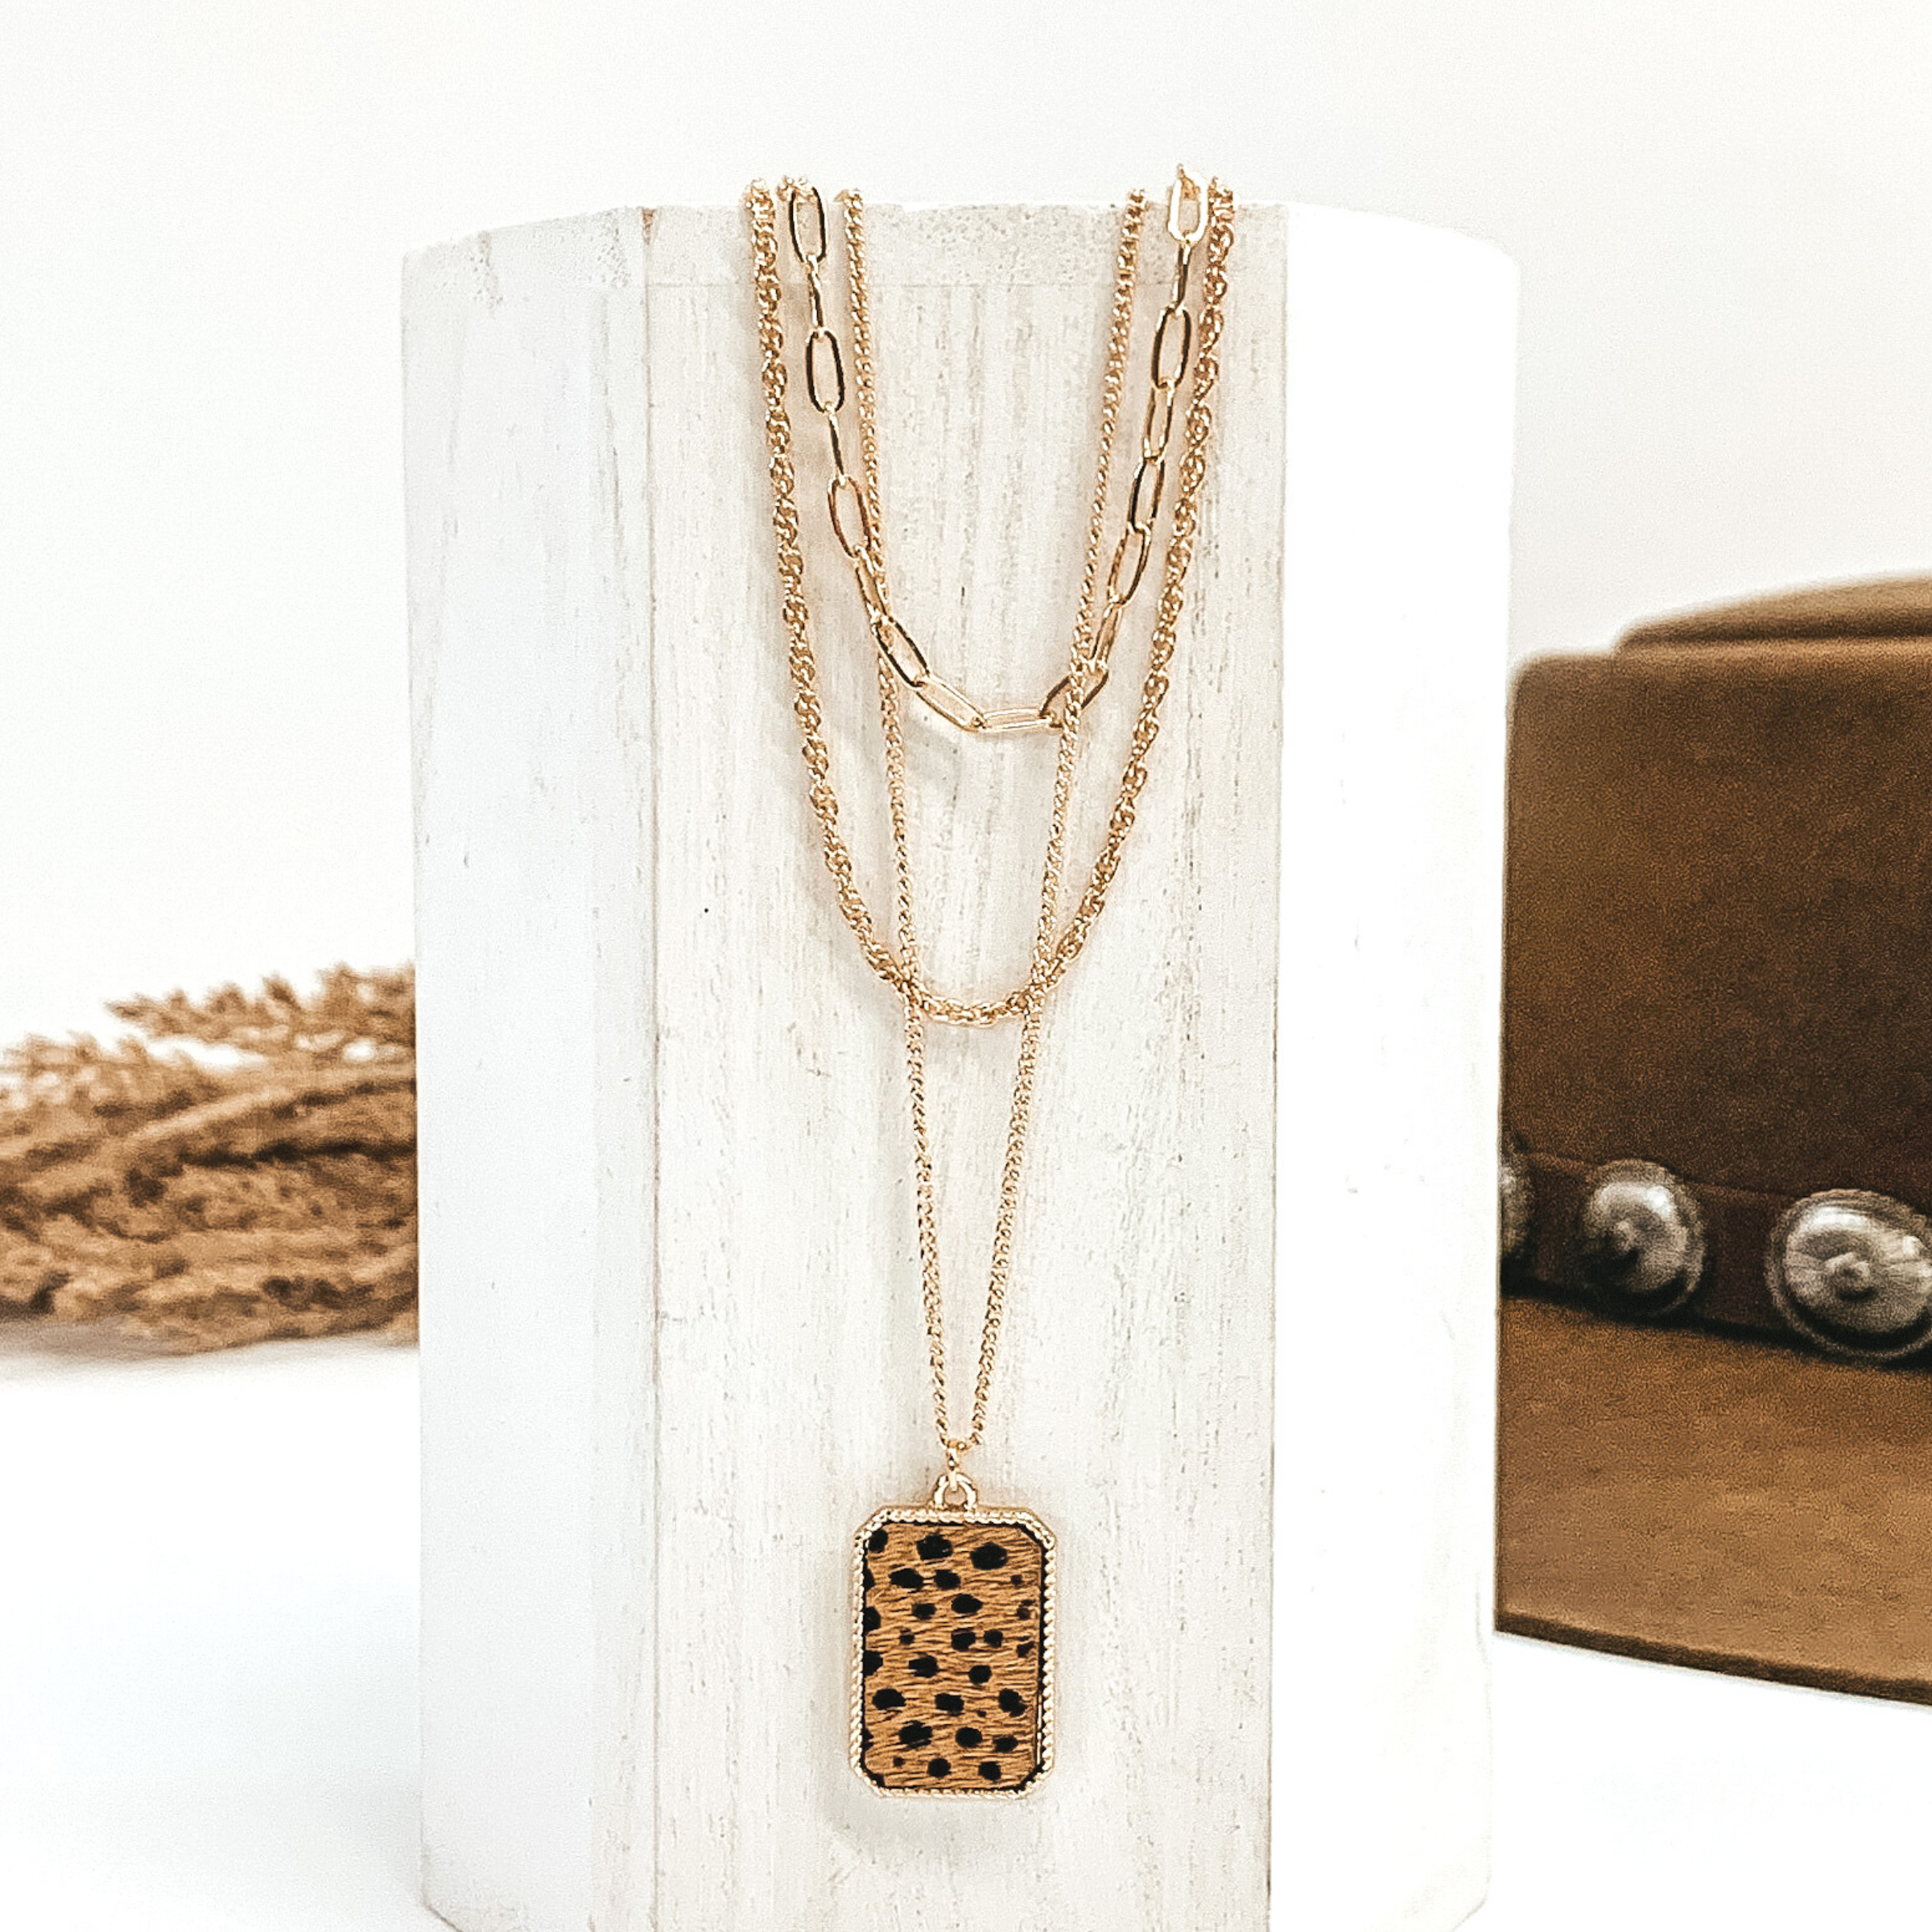 There are three different gold chains at different lengths laying on a white piece of wood. The longest chain has gold rectangle pendant with a brown and black dotted print inlay. This is all pictured on a white background with a brown hat and brown floral in the background.